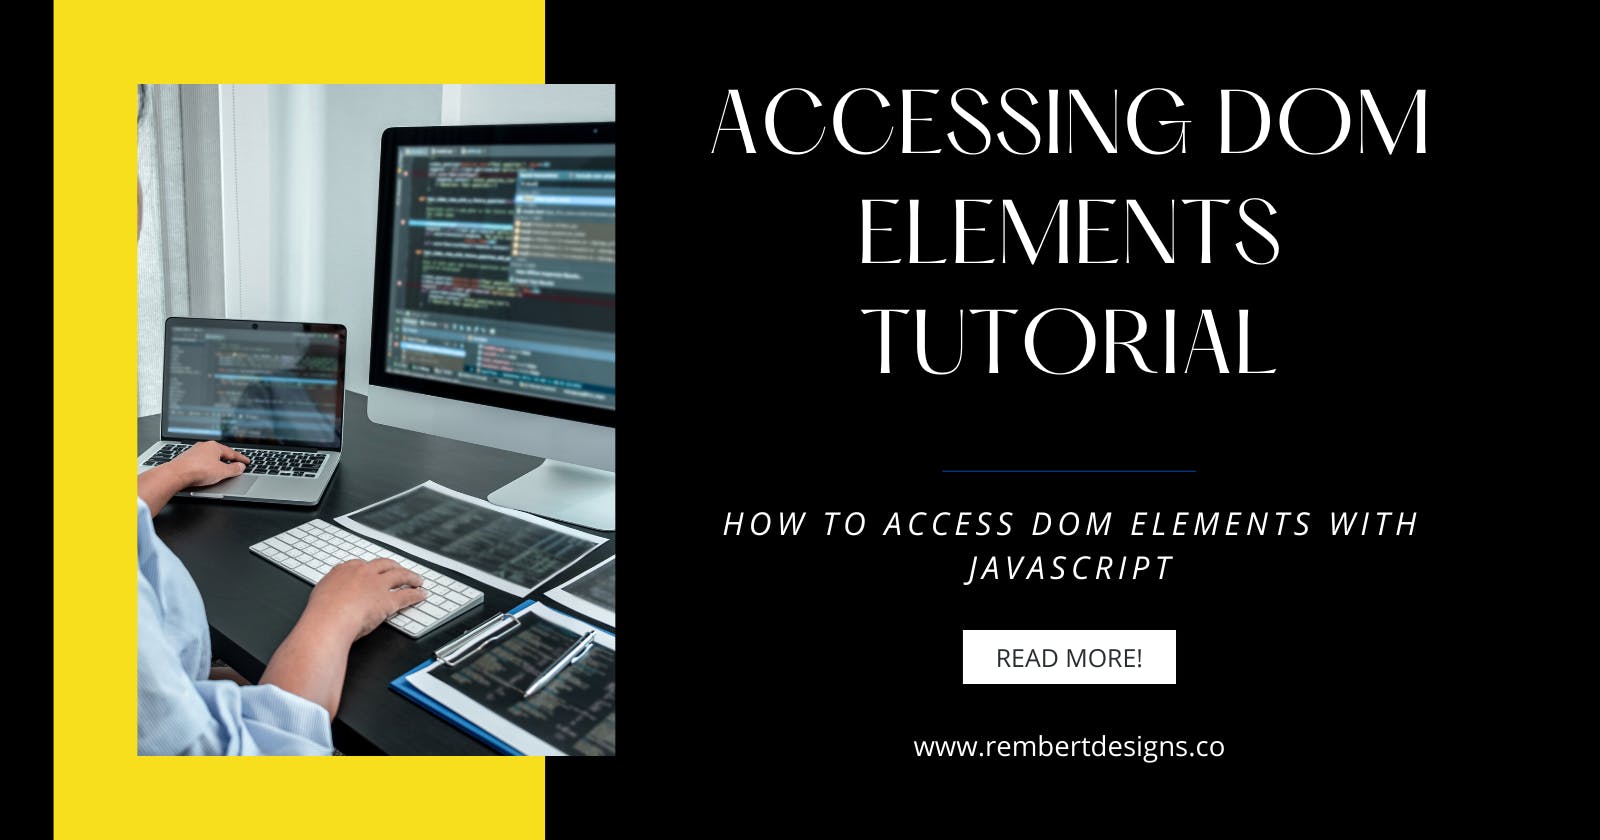 Accessing DOM Elements Tutorial